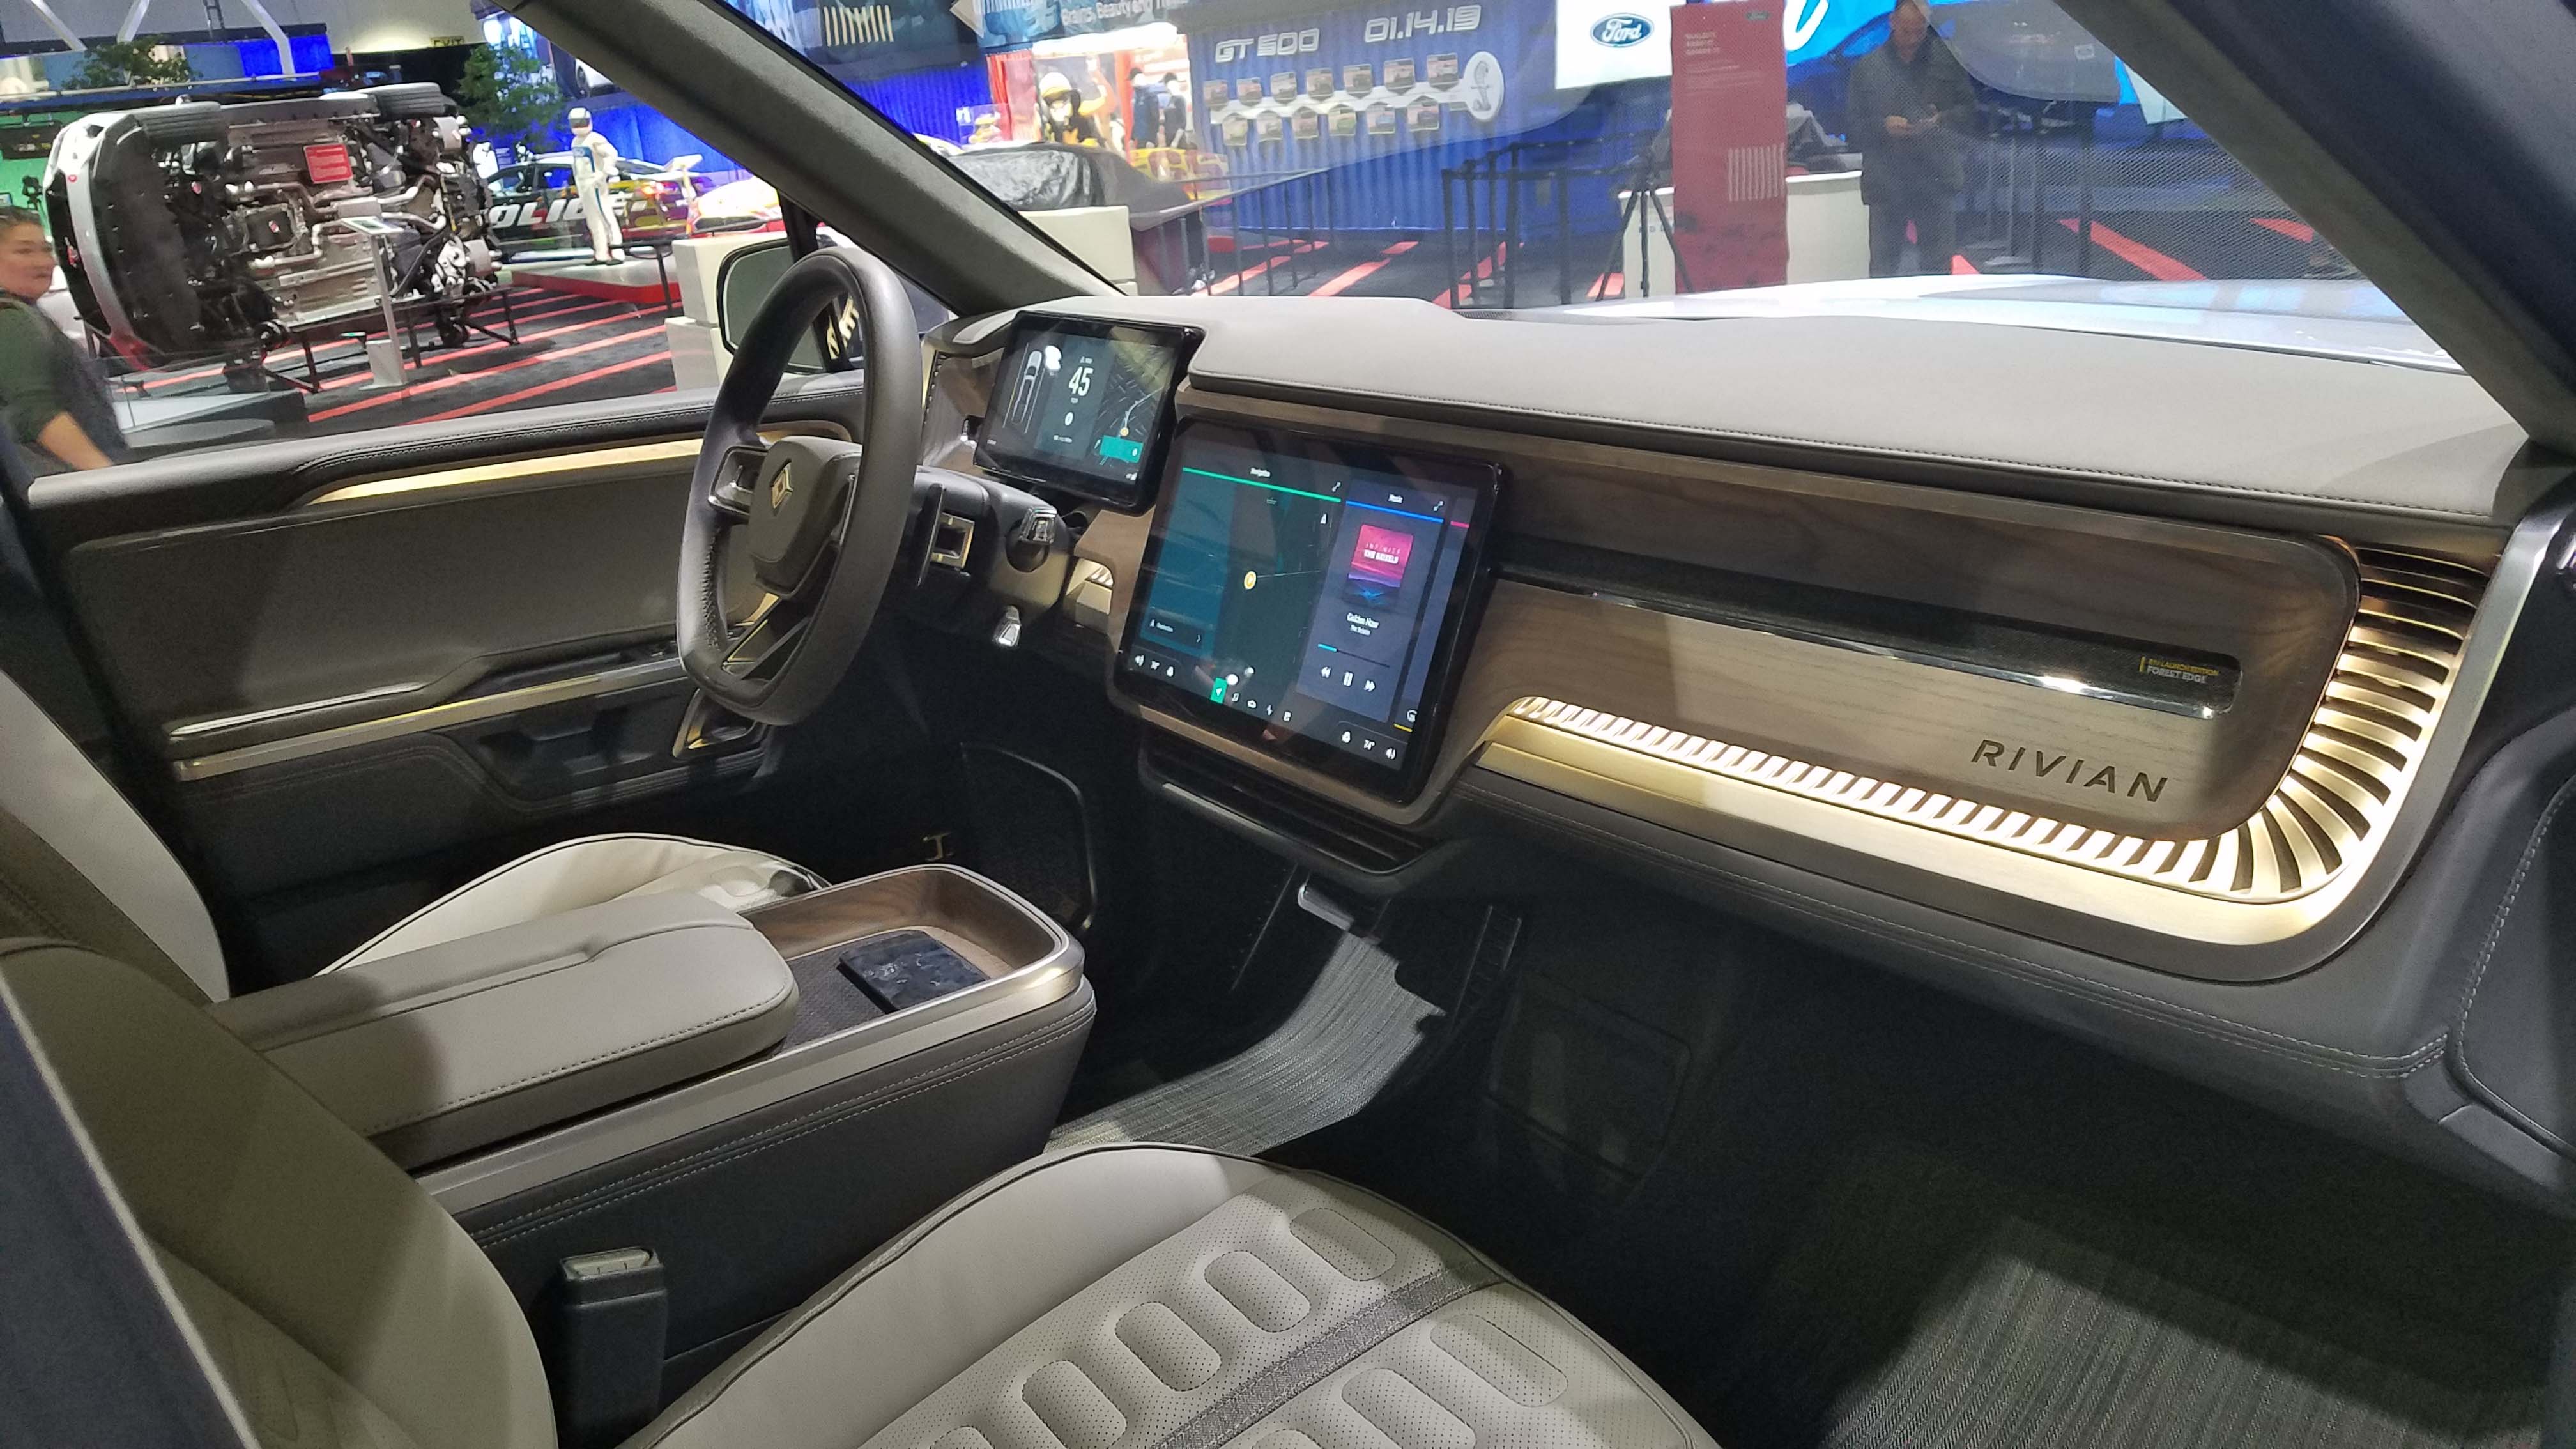 The interior of the Rivian R1T pickup featues big, digital screens and generous use of wood trim. In addition to 400 miles of range the truck offers Level 3 autonomous driving.